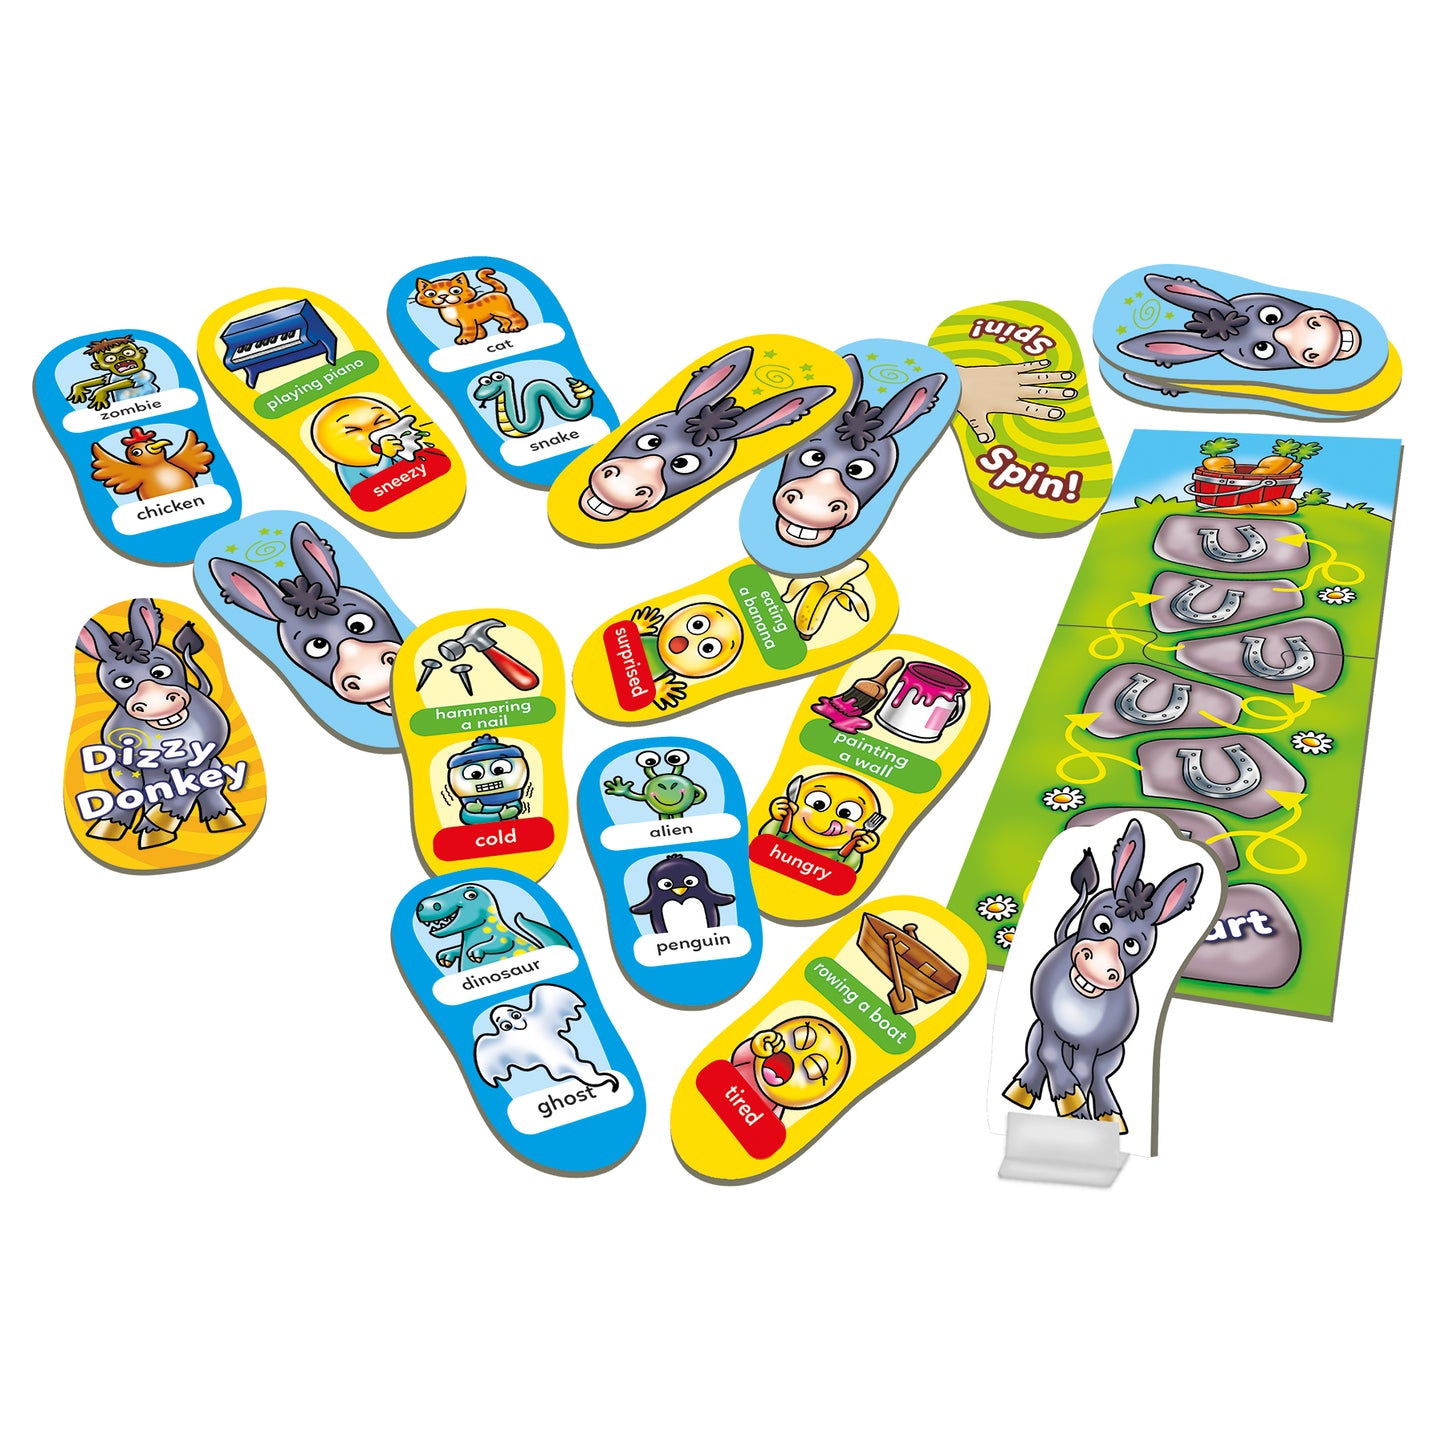 Orchard Toys Dizzy Donkey Action and Performance Game